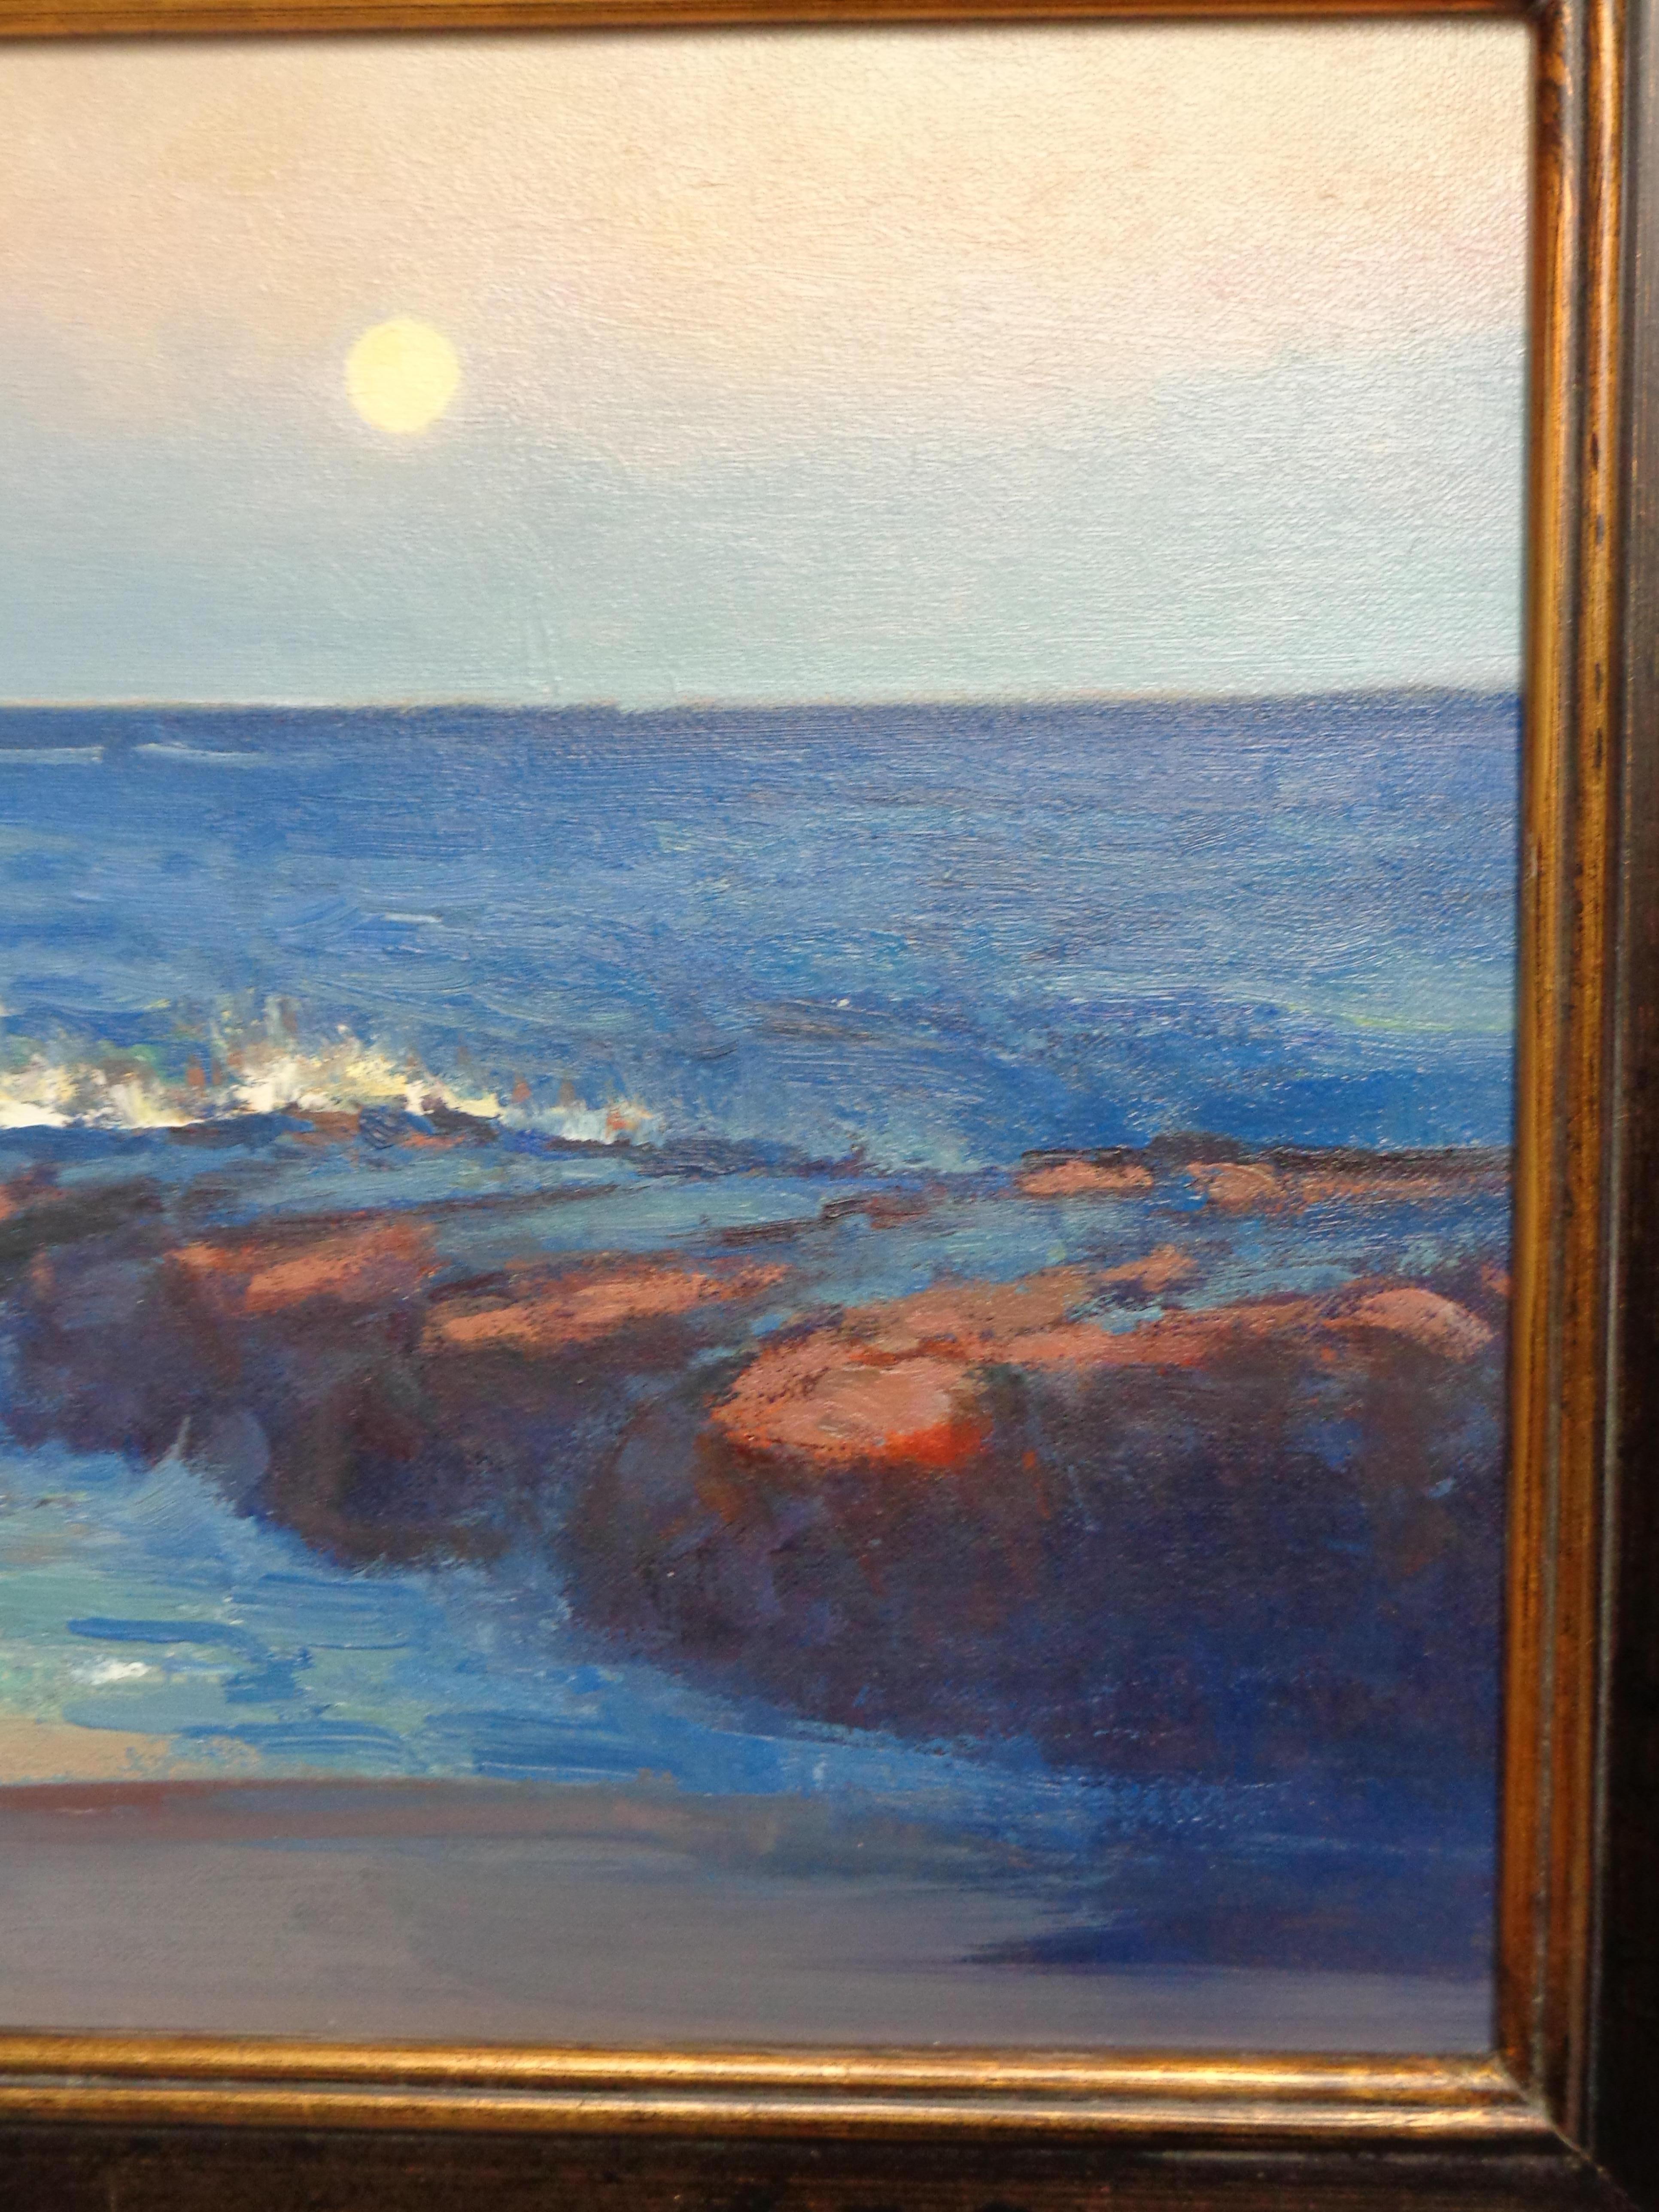  Impressionistic Moonlight Seascape Oil Painting Michael Budden Beach Jetty For Sale 4